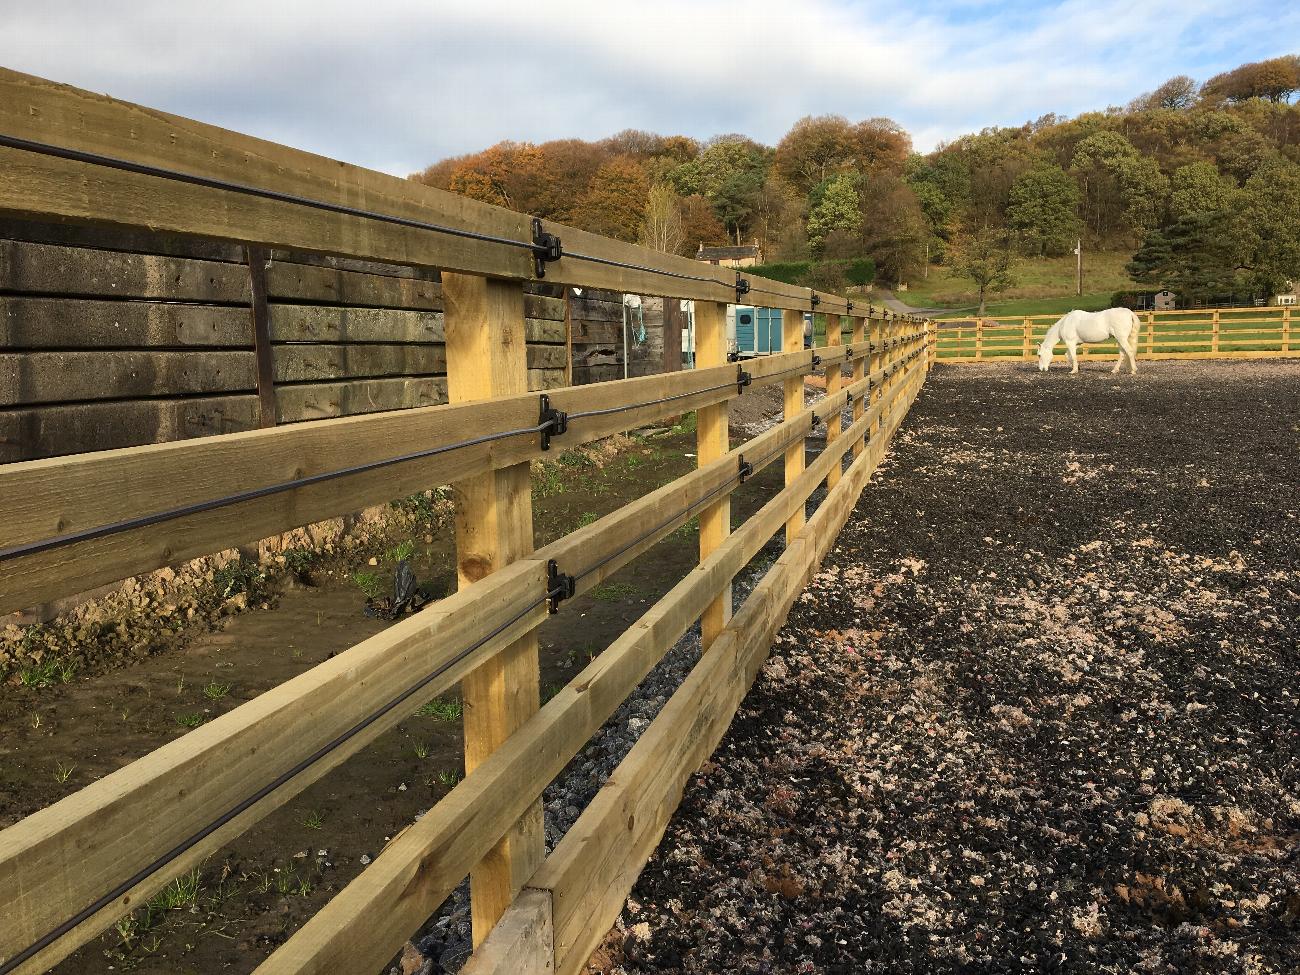 Arenas & Buildings | equestrian stables, field shelters, equine accessories, arena and menage company in Blackburn and Lancashire gallery image 9